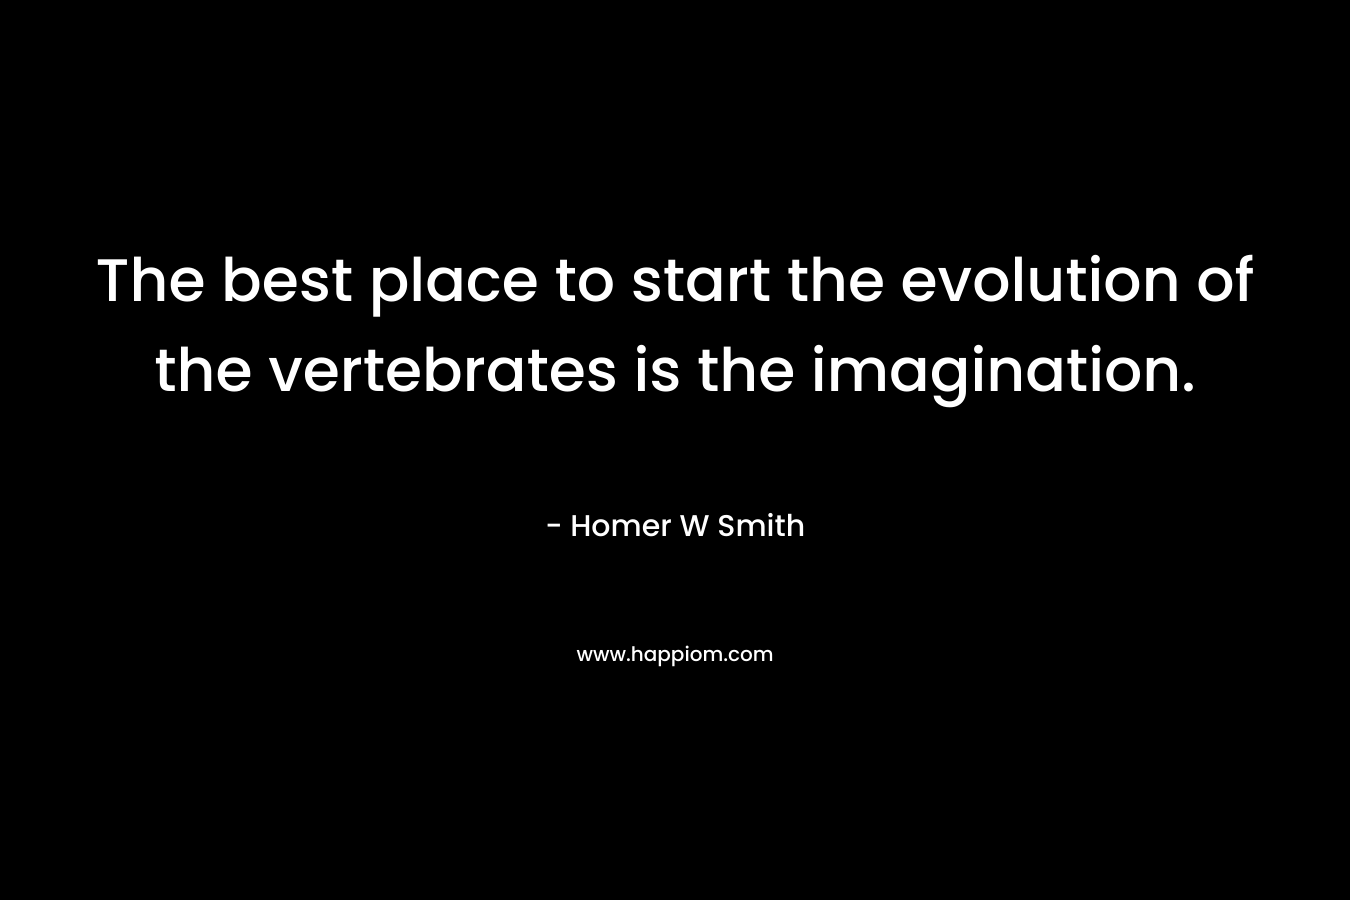 The best place to start the evolution of the vertebrates is the imagination.